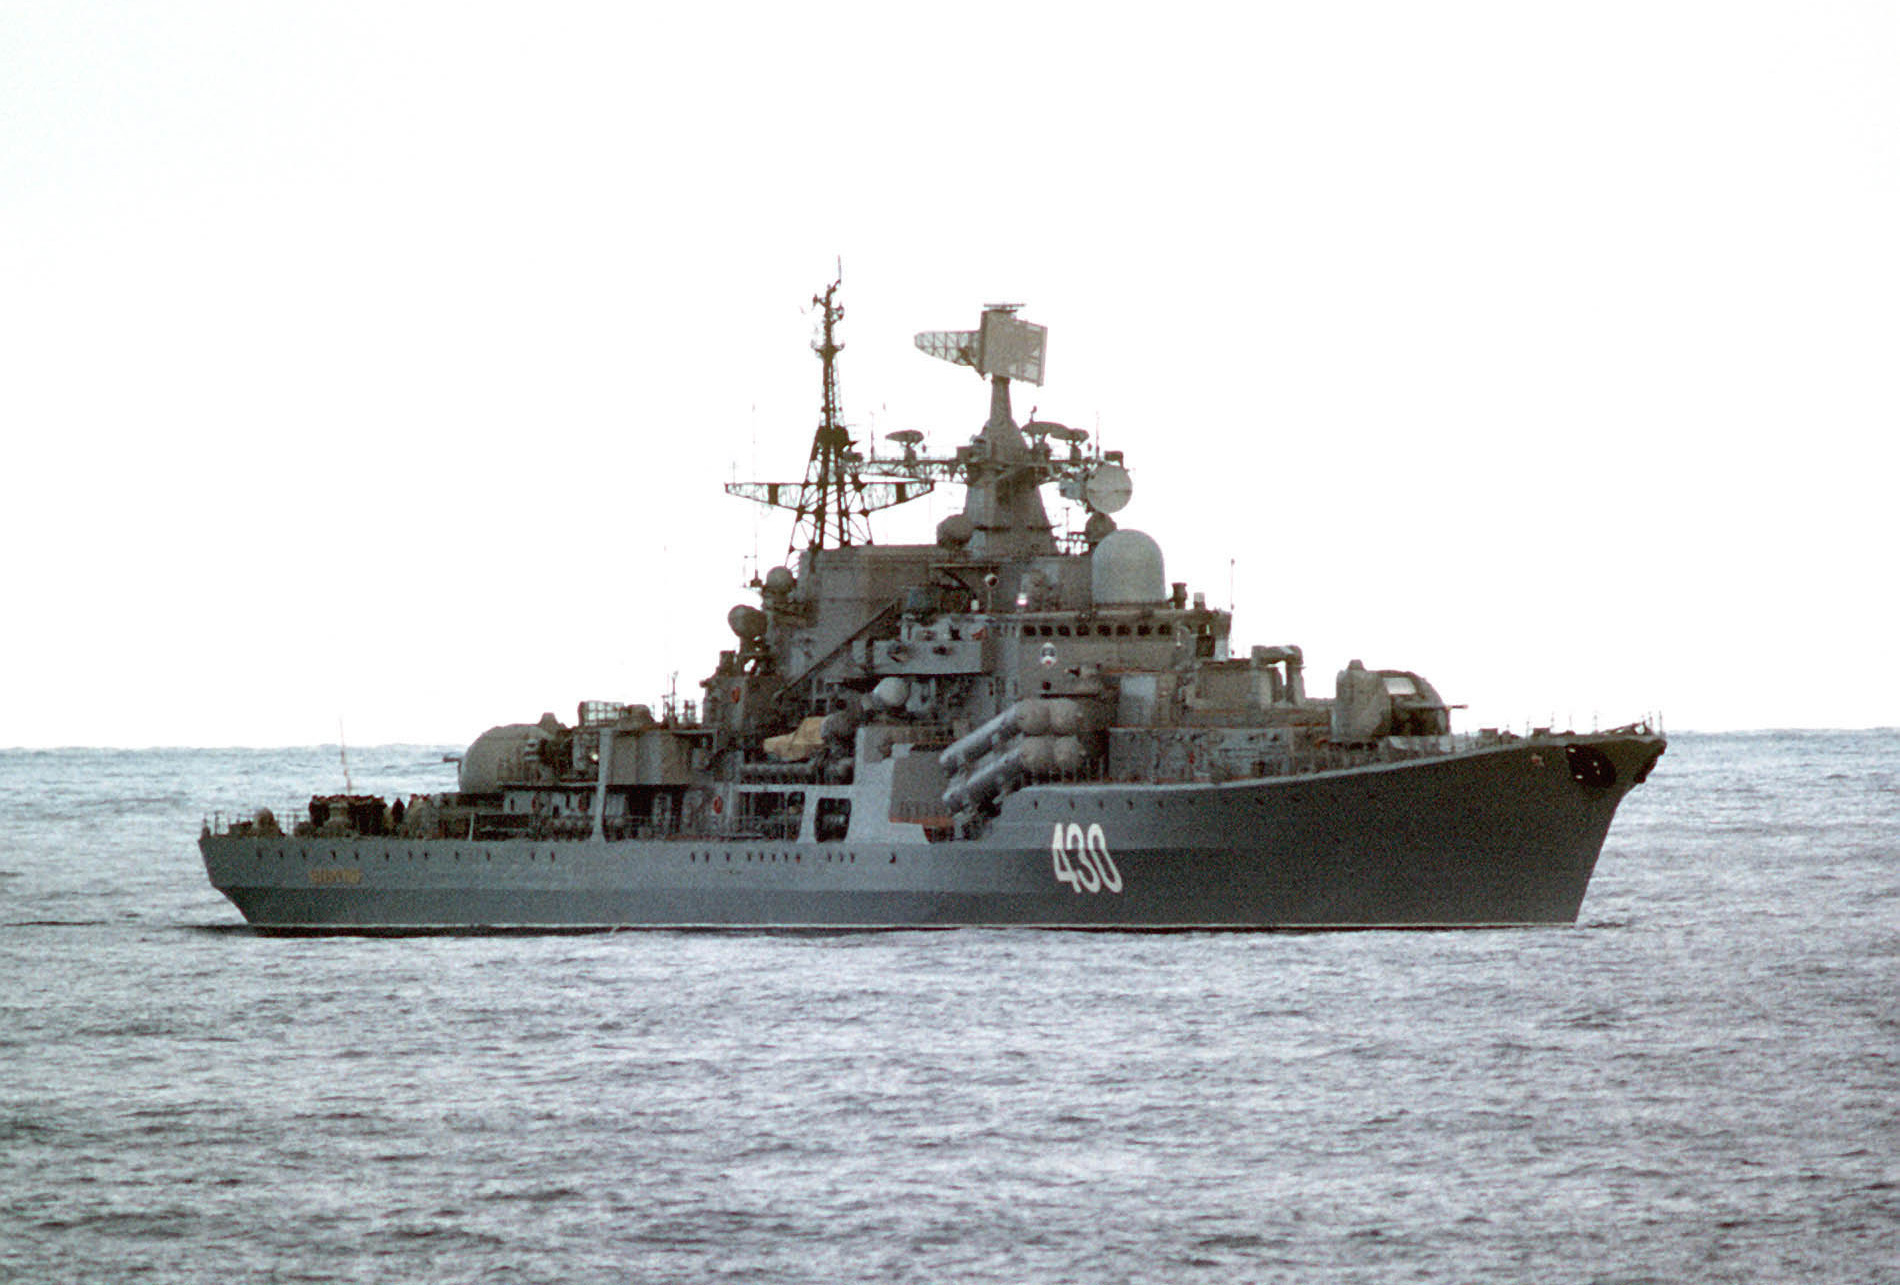 Image about China Upgrades Russian Sovremenny-class Destroyers with Anti-ship Cruise Missiles